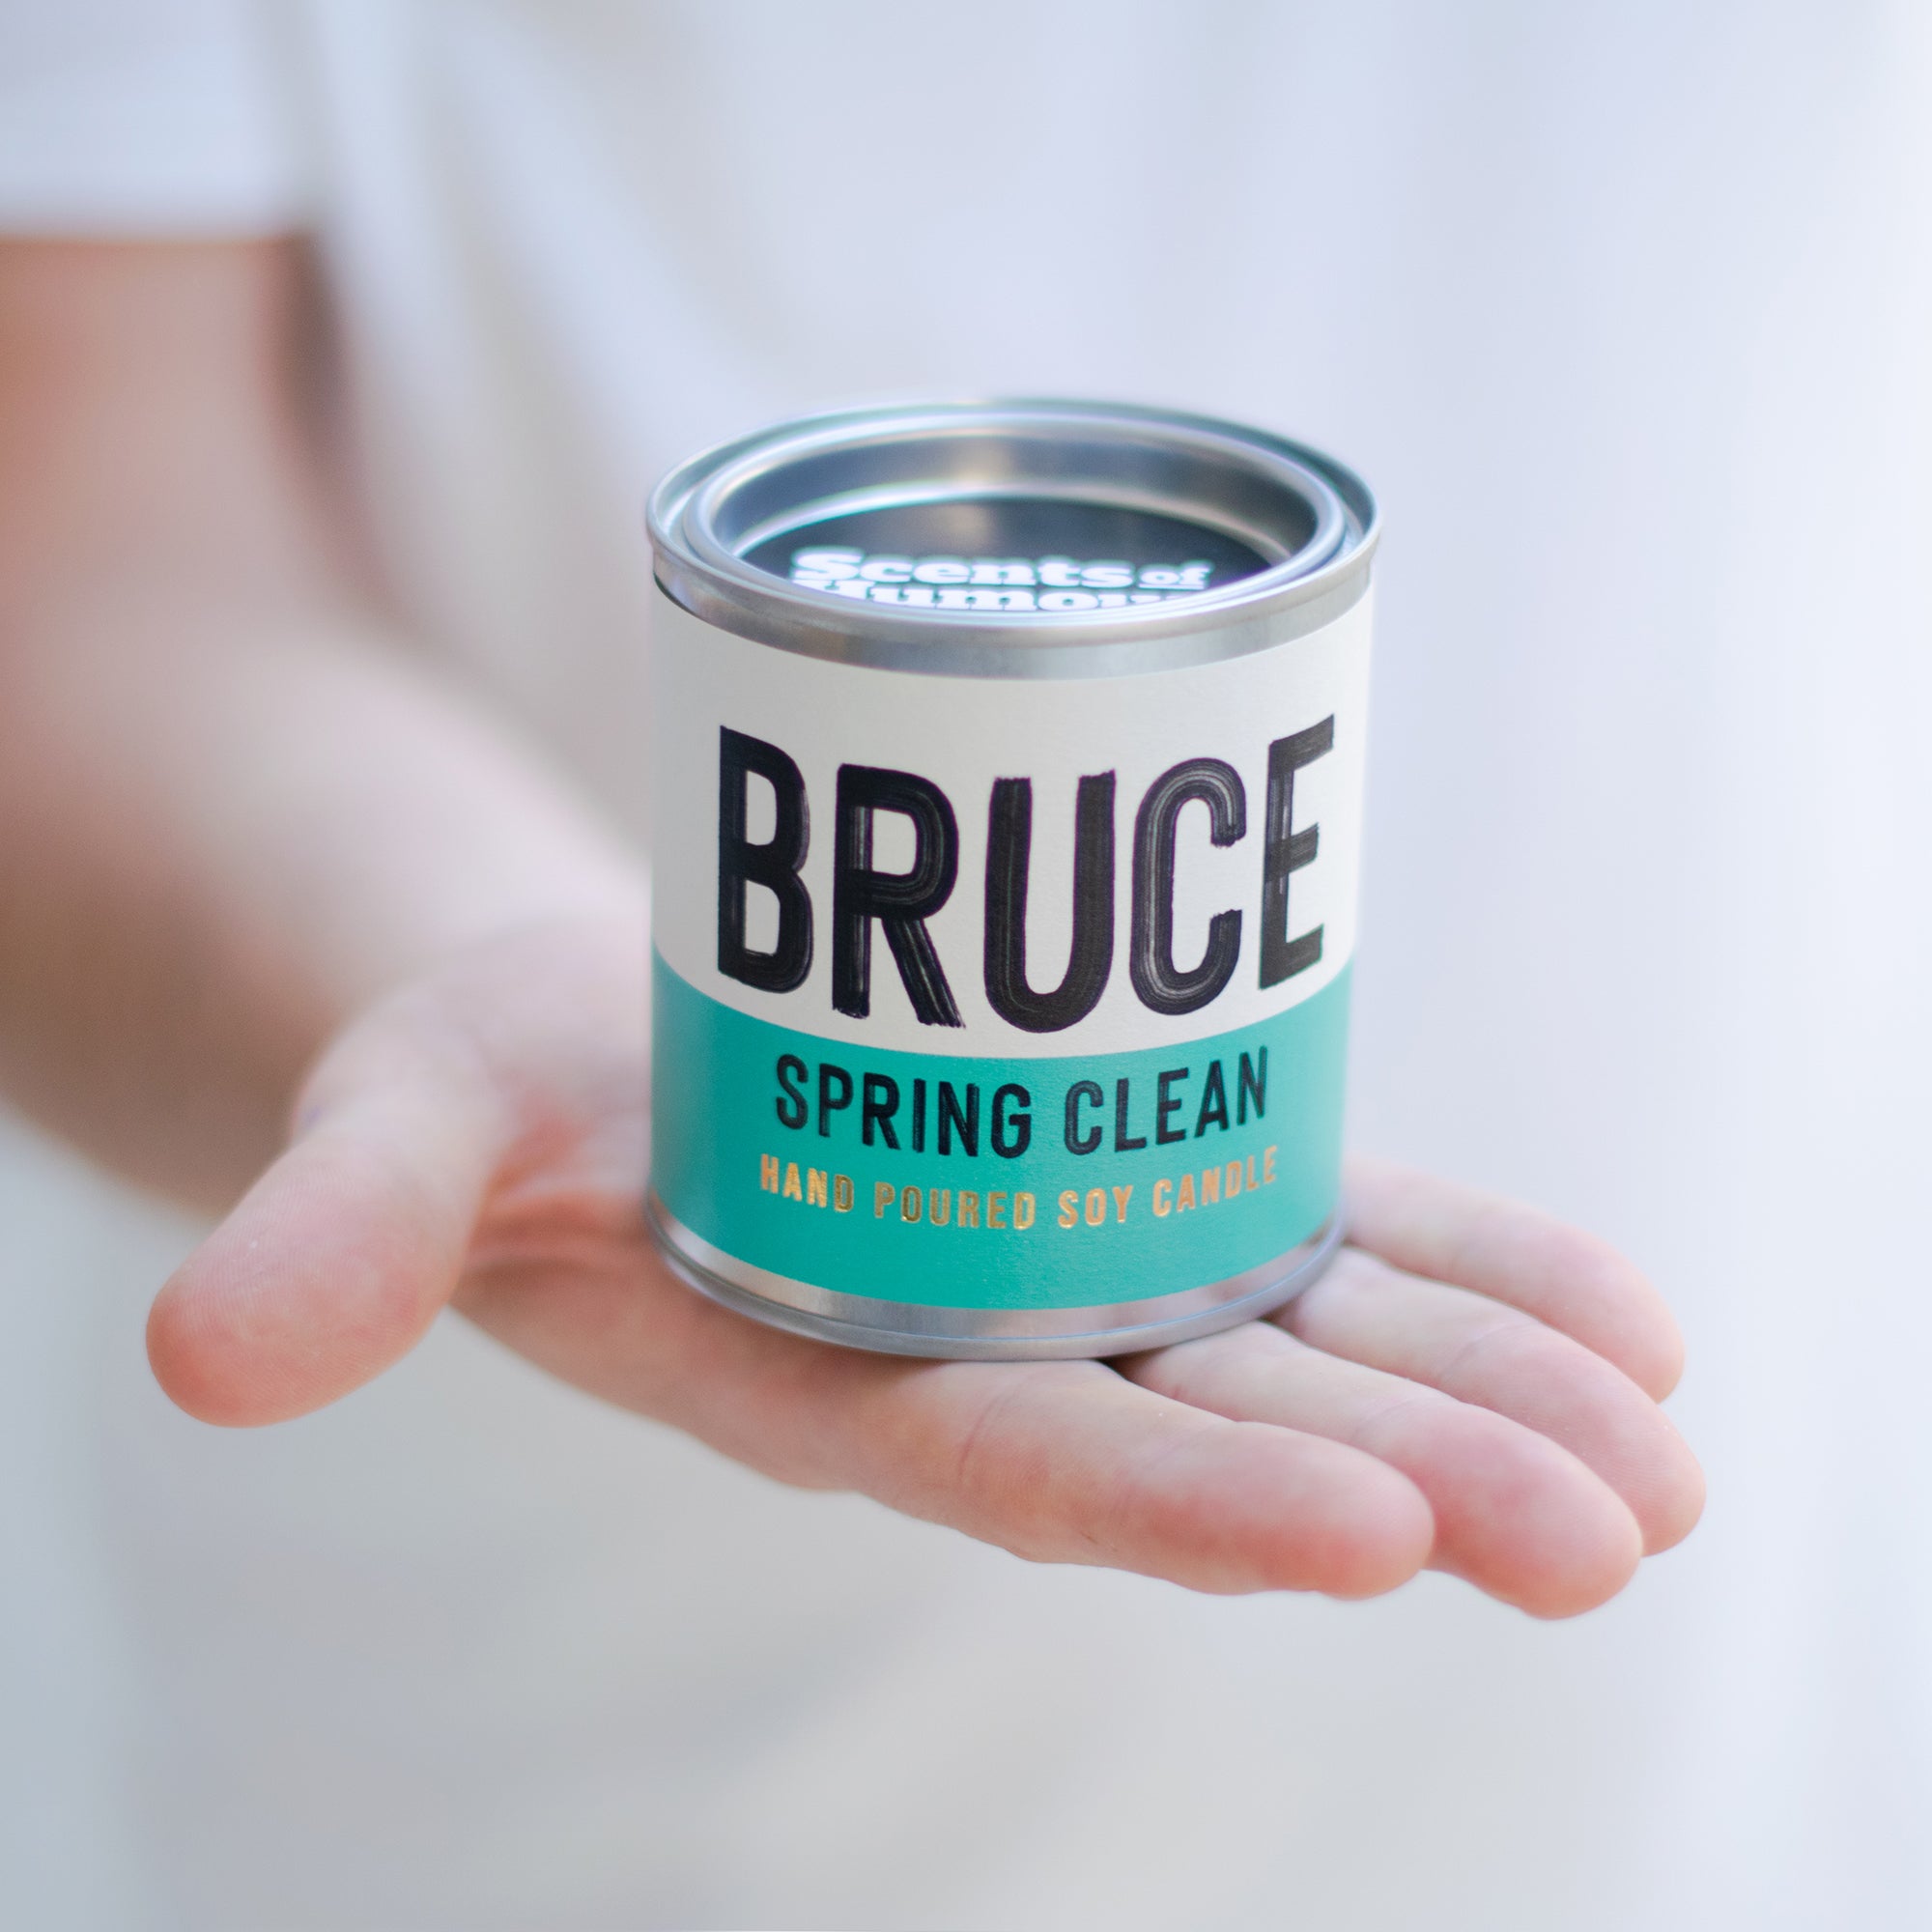 Bruce Spring Clean - Fresh cotton scented candle